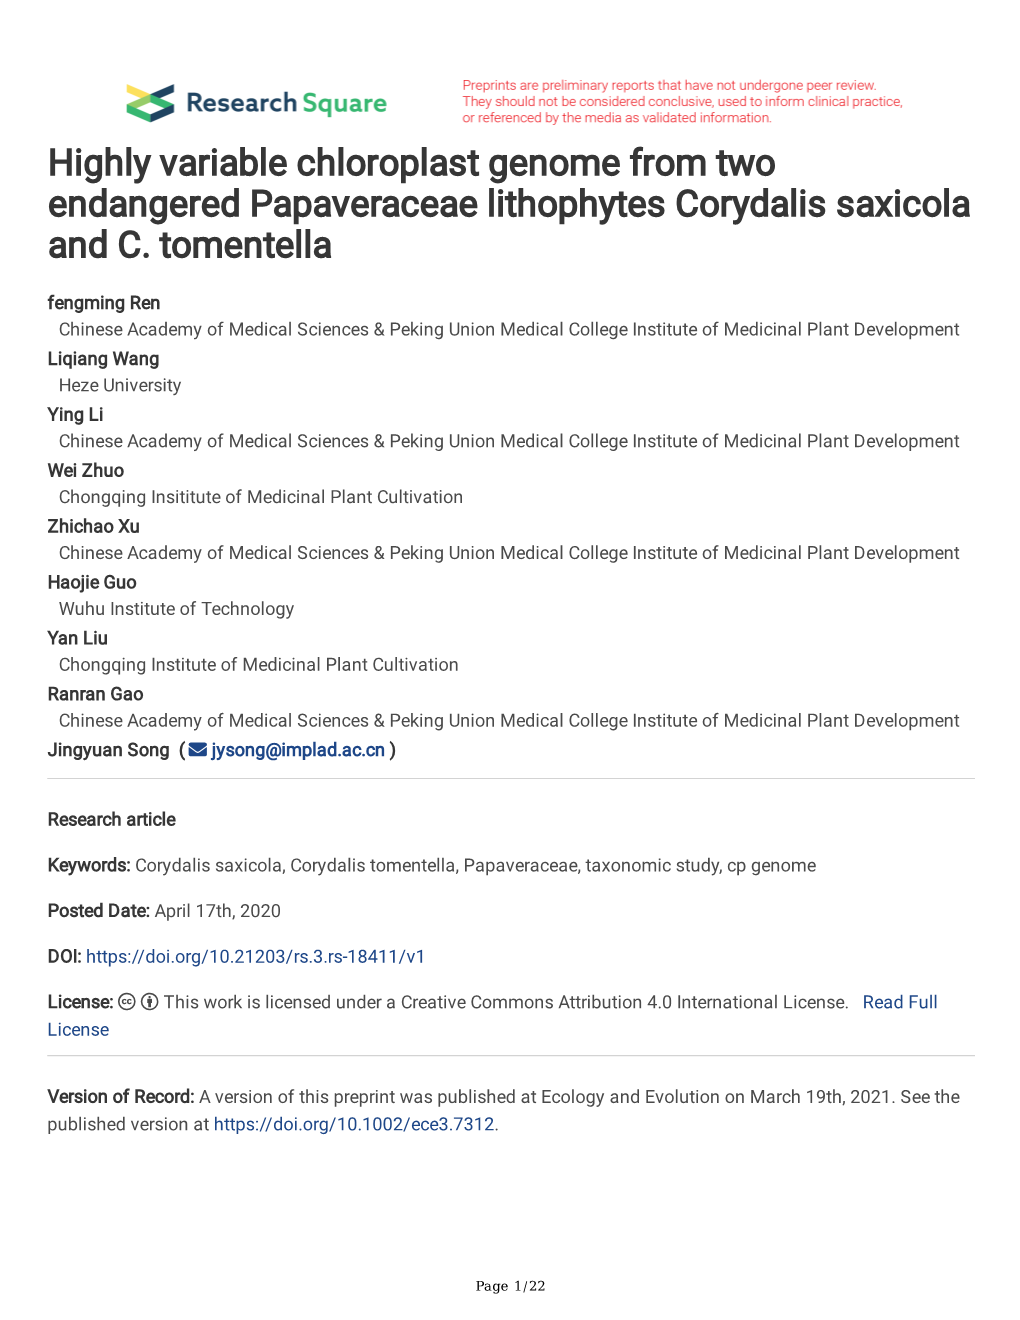 Highly Variable Chloroplast Genome from Two Endangered Papaveraceae Lithophytes Corydalis Saxicola and C